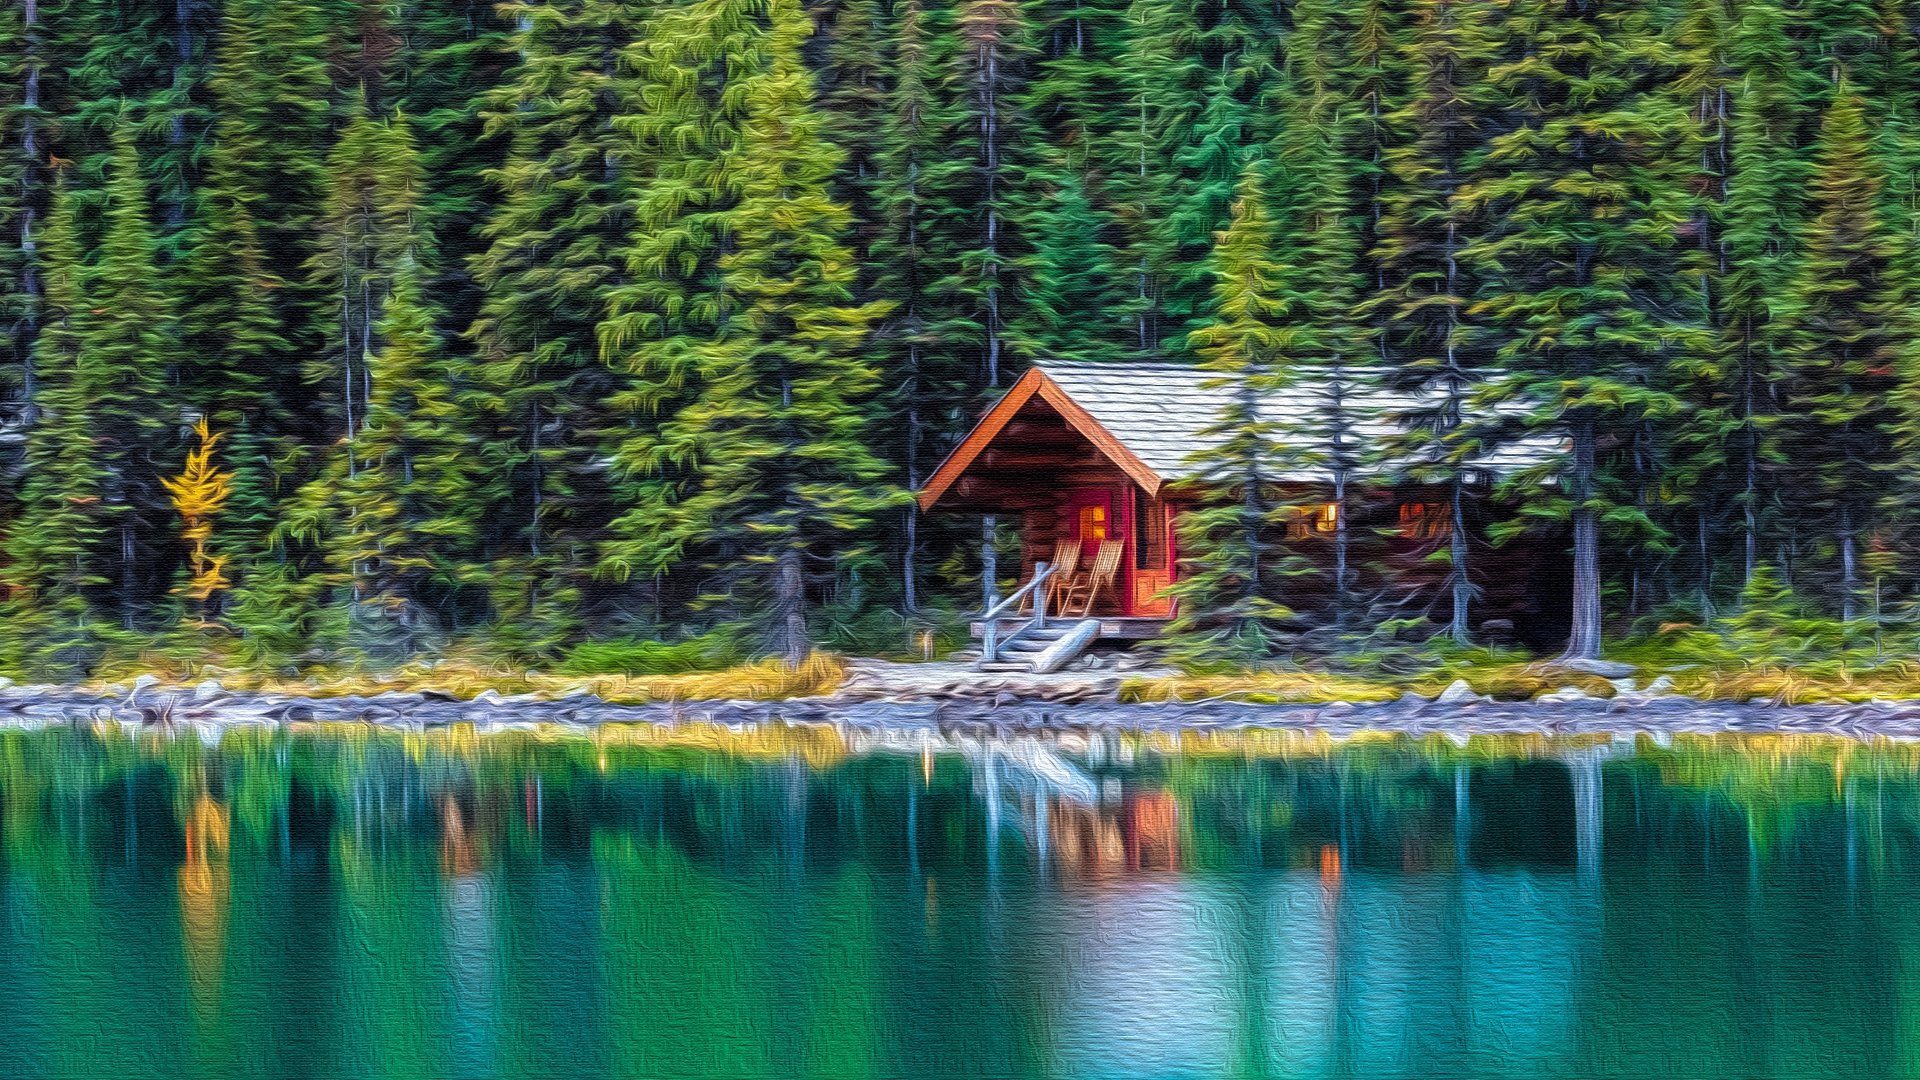 Lakeside Cabin - Oil on Canvas by Manufan63